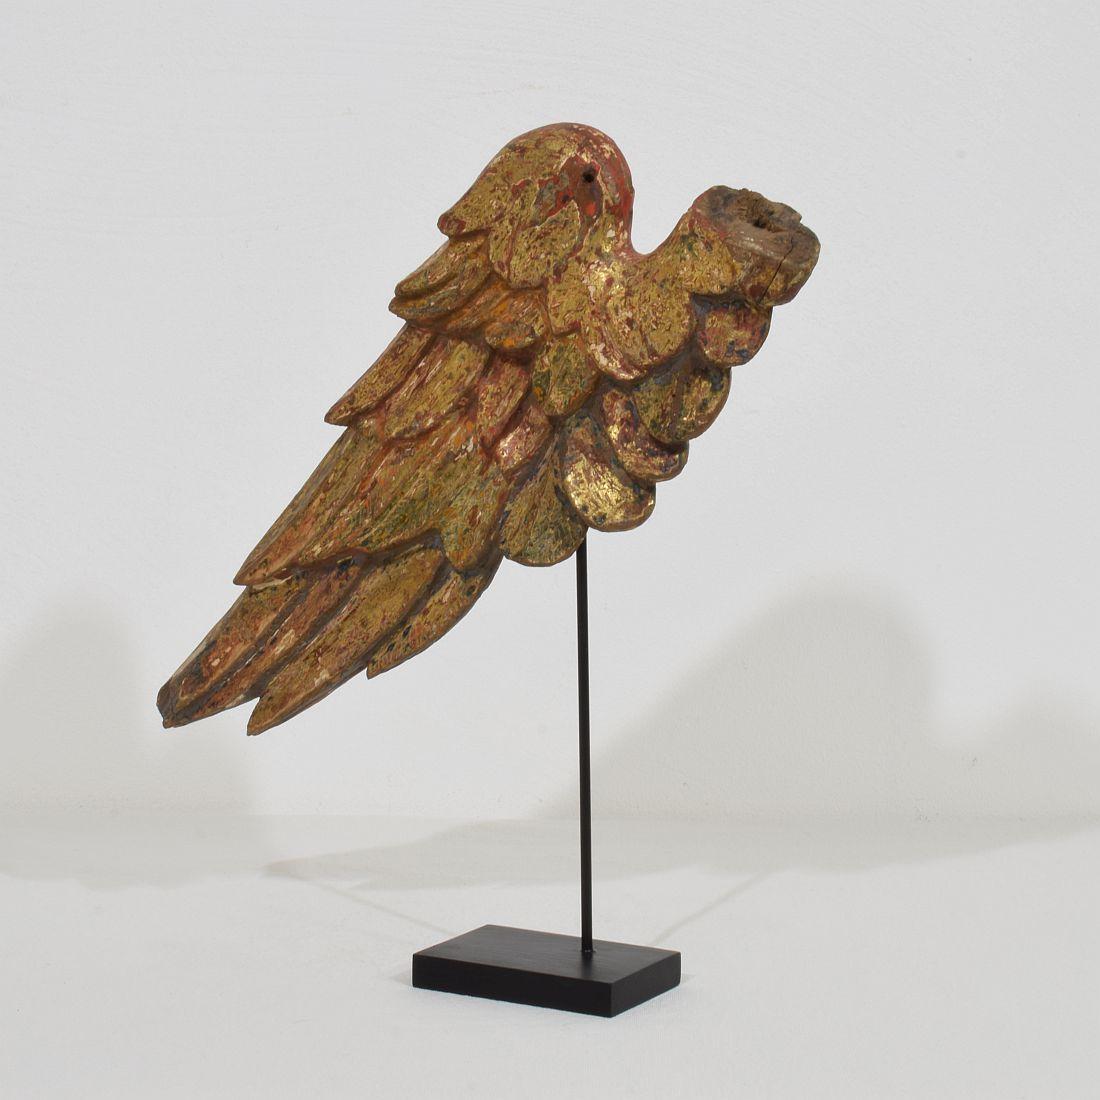 Beautiful Baroque angel-wing. Rare and very decorative item placed on a wooden base, Italy, circa 1750. Weathered. Measurement is inclusive the wooden base.